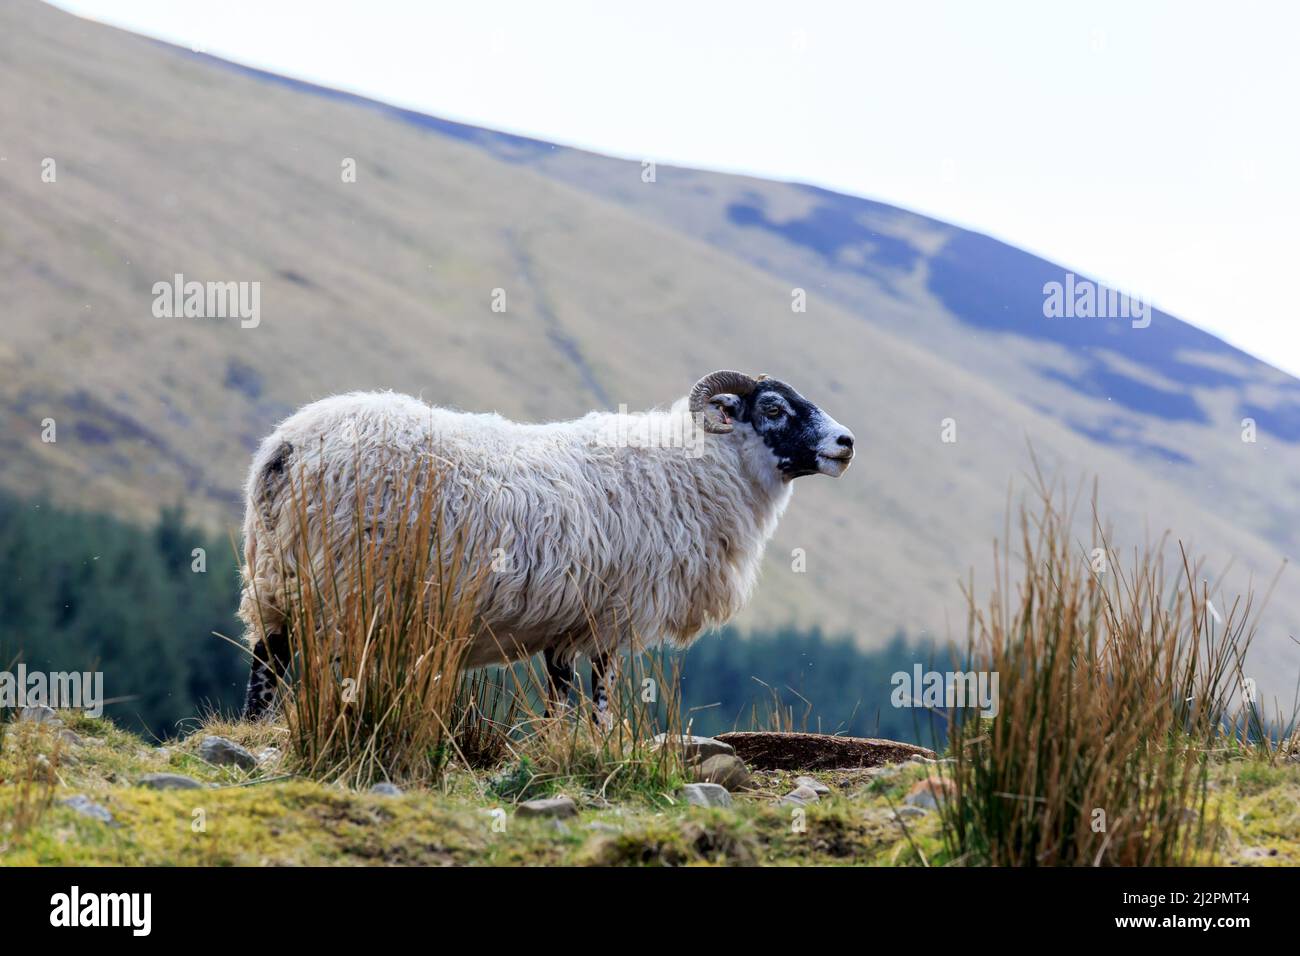 Scottish Blackface sheep standing at the top of hill partially hidden by  tufted grass in Scotland Stock Photo